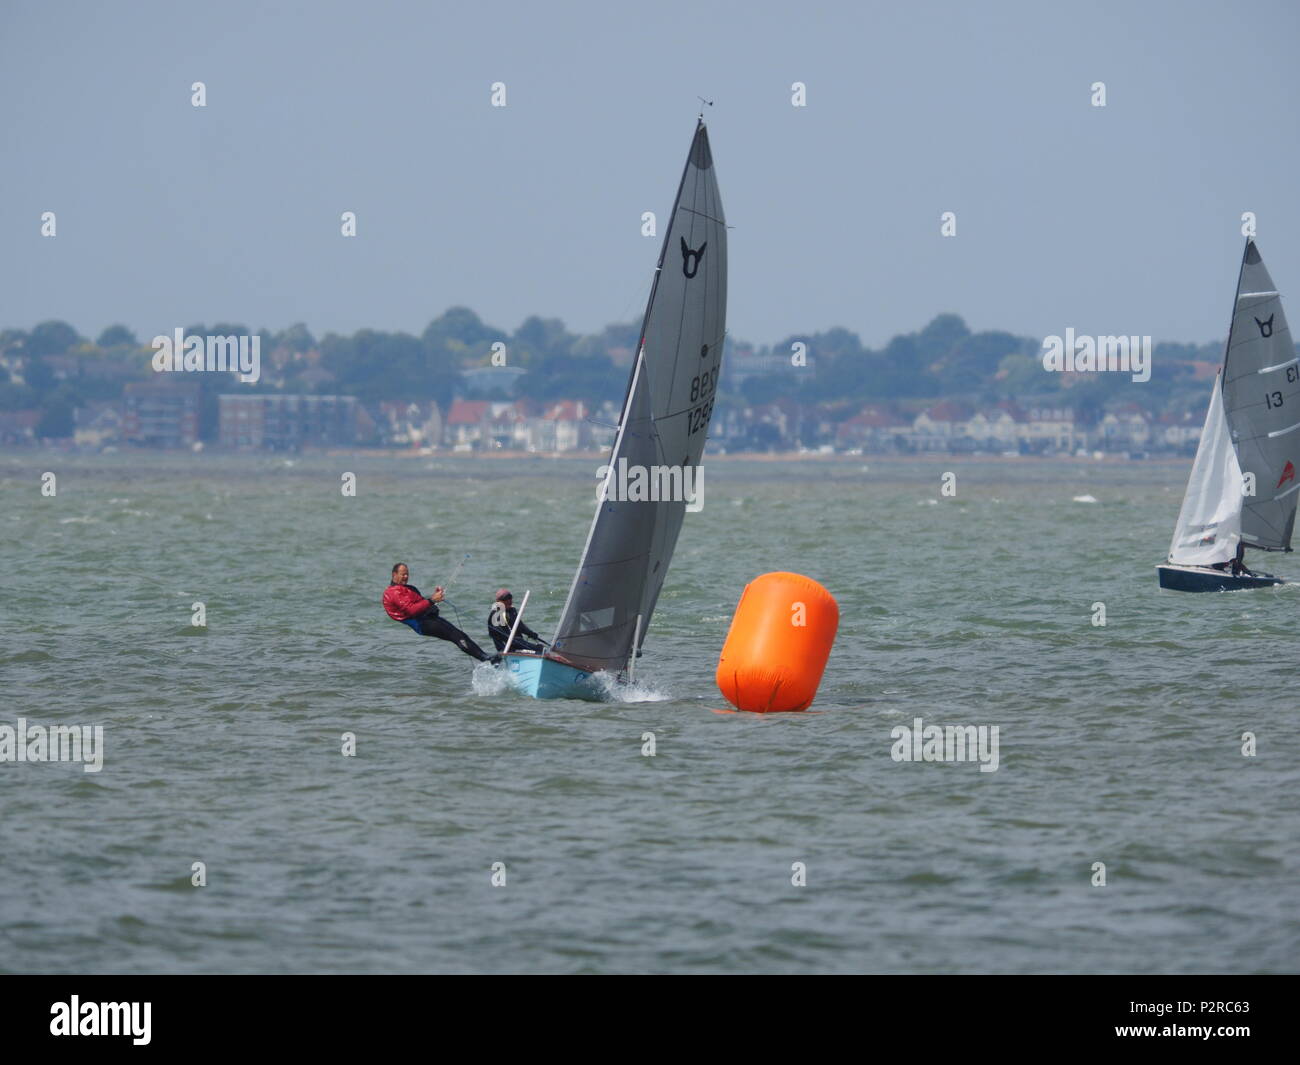 Sheerness, Kent, UK. 16th June, 2018. UK Weather: a warm day of mostly sunny spells, but with a few overcast moments in Sheerness, Kent. Sailors take part in a weekend regatta for the Osprey class of sailing dinghy at the Isle of Sheppey Sailing Club. Credit: James Bell/Alamy Live News Stock Photo